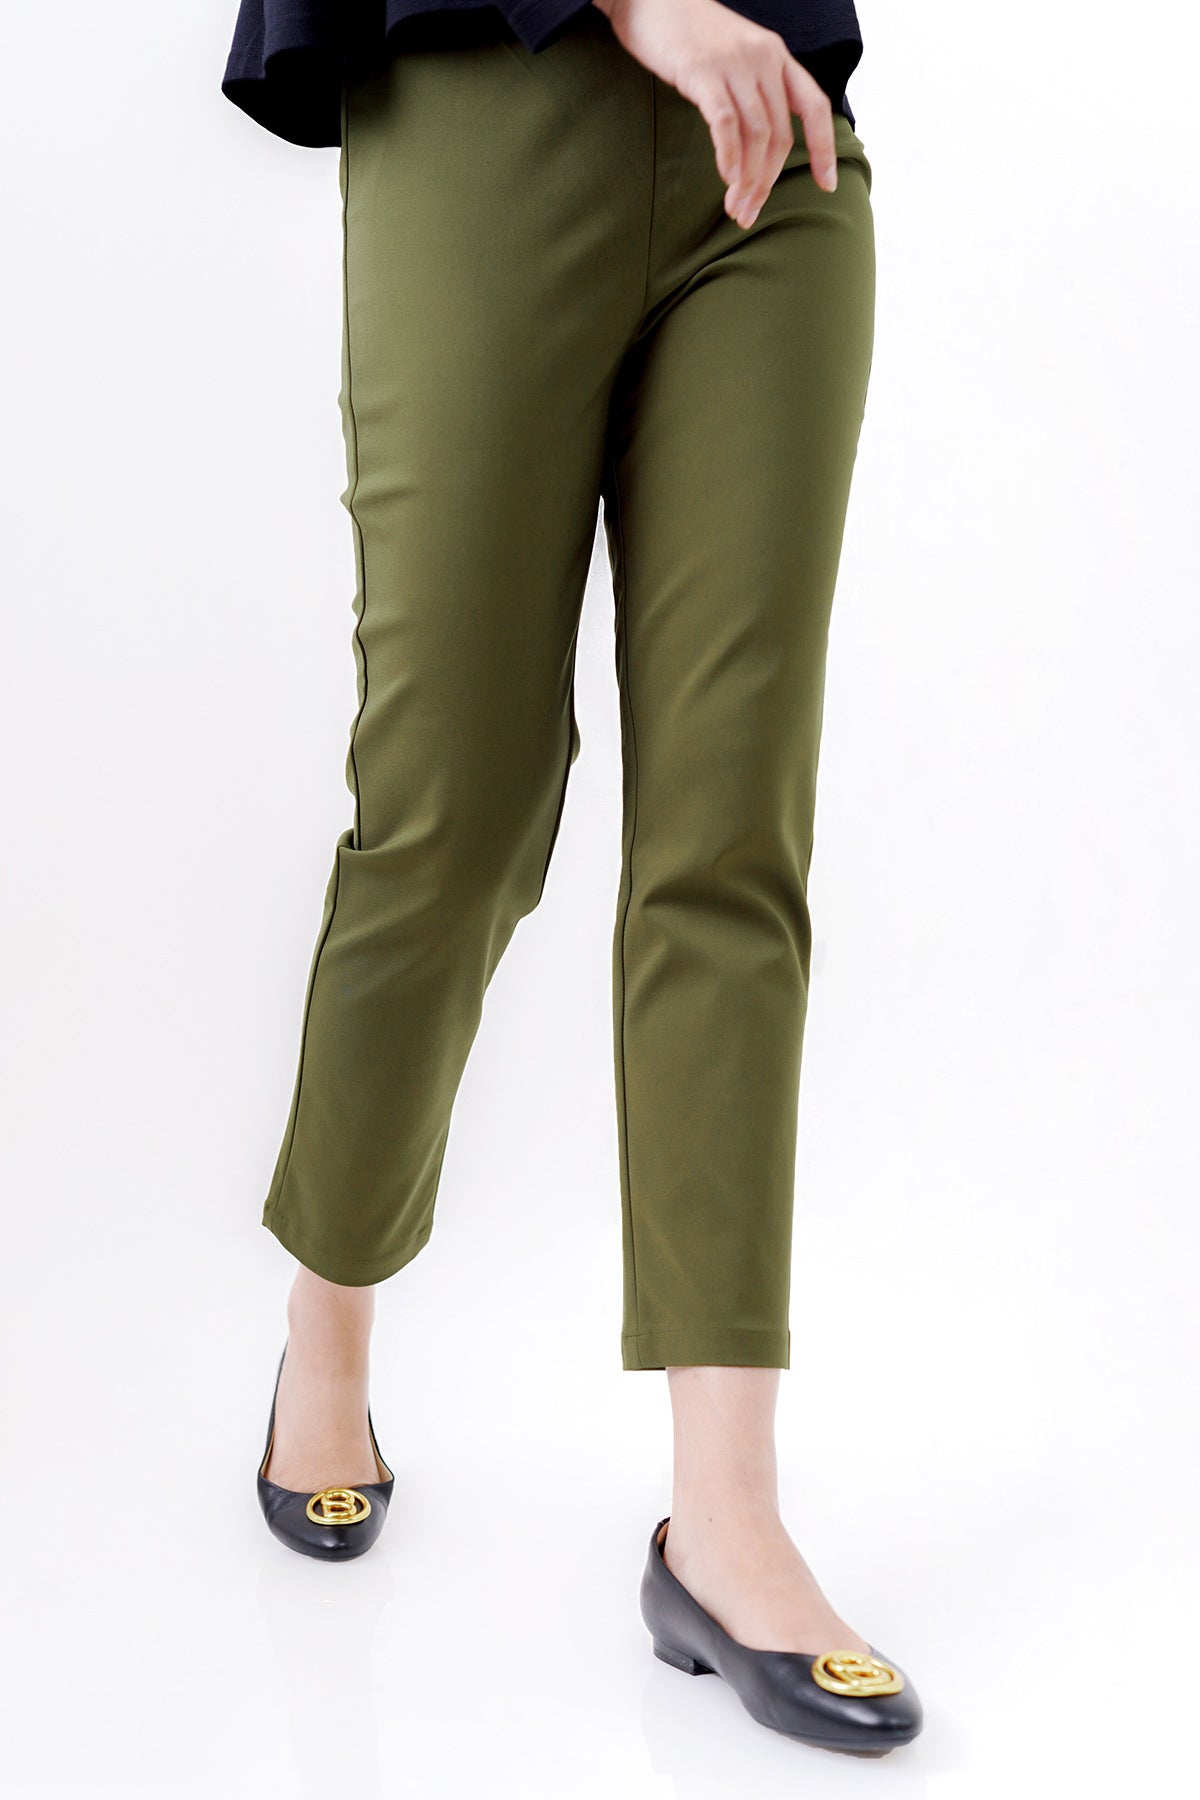 Green Ankle Length Pants